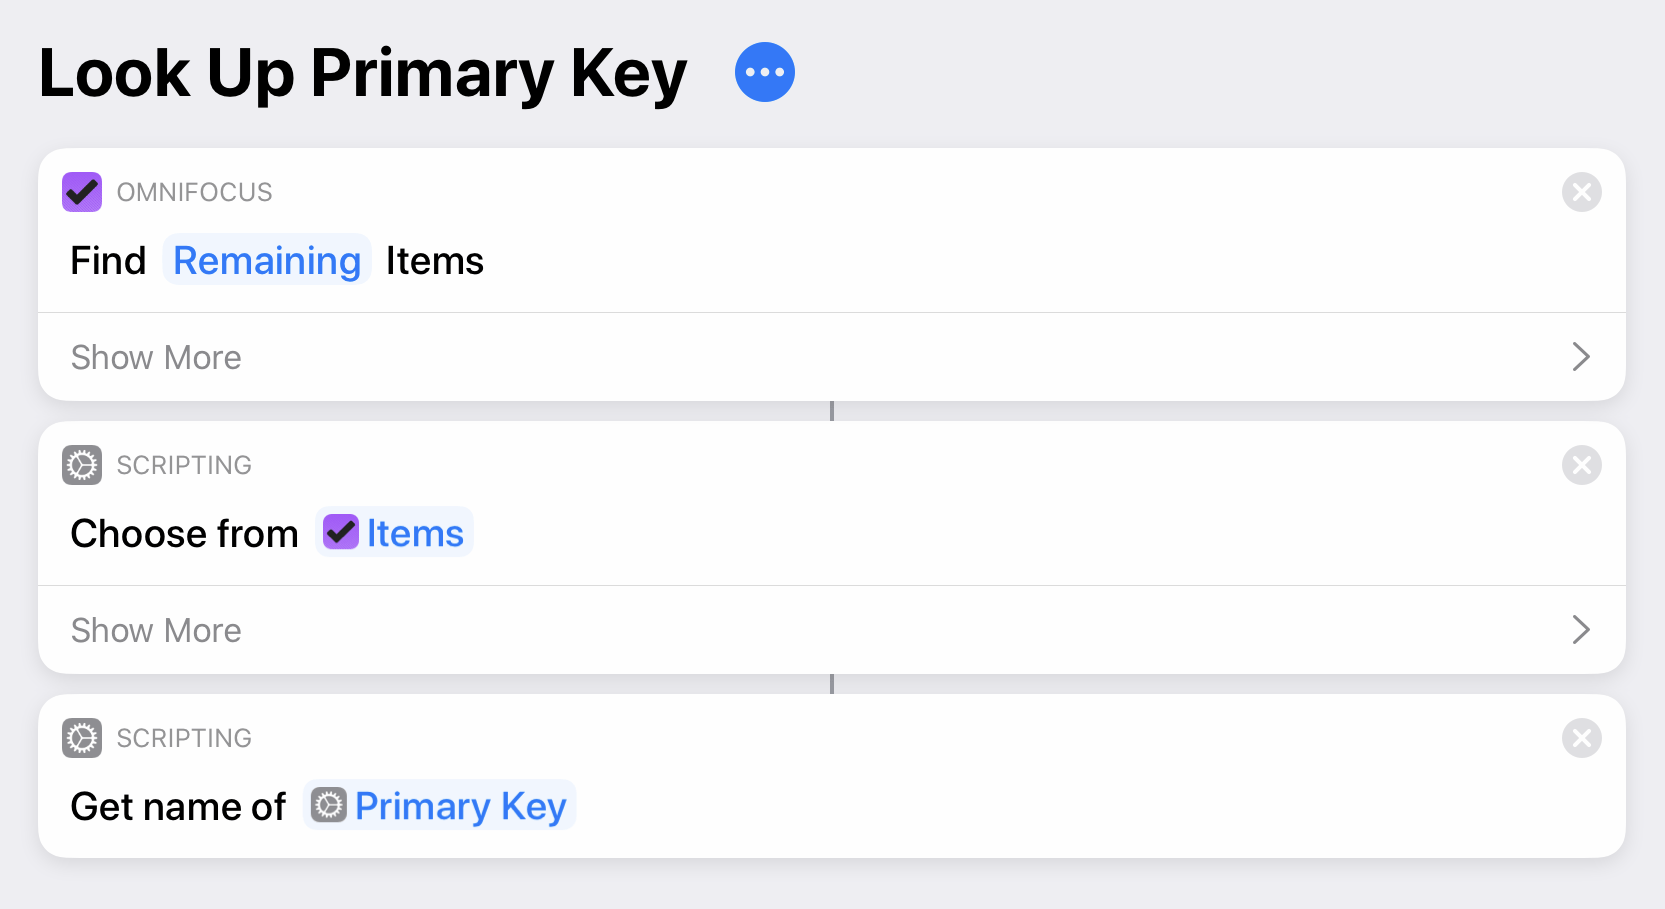 A sample shortcut for looking up an item's Primary Key.